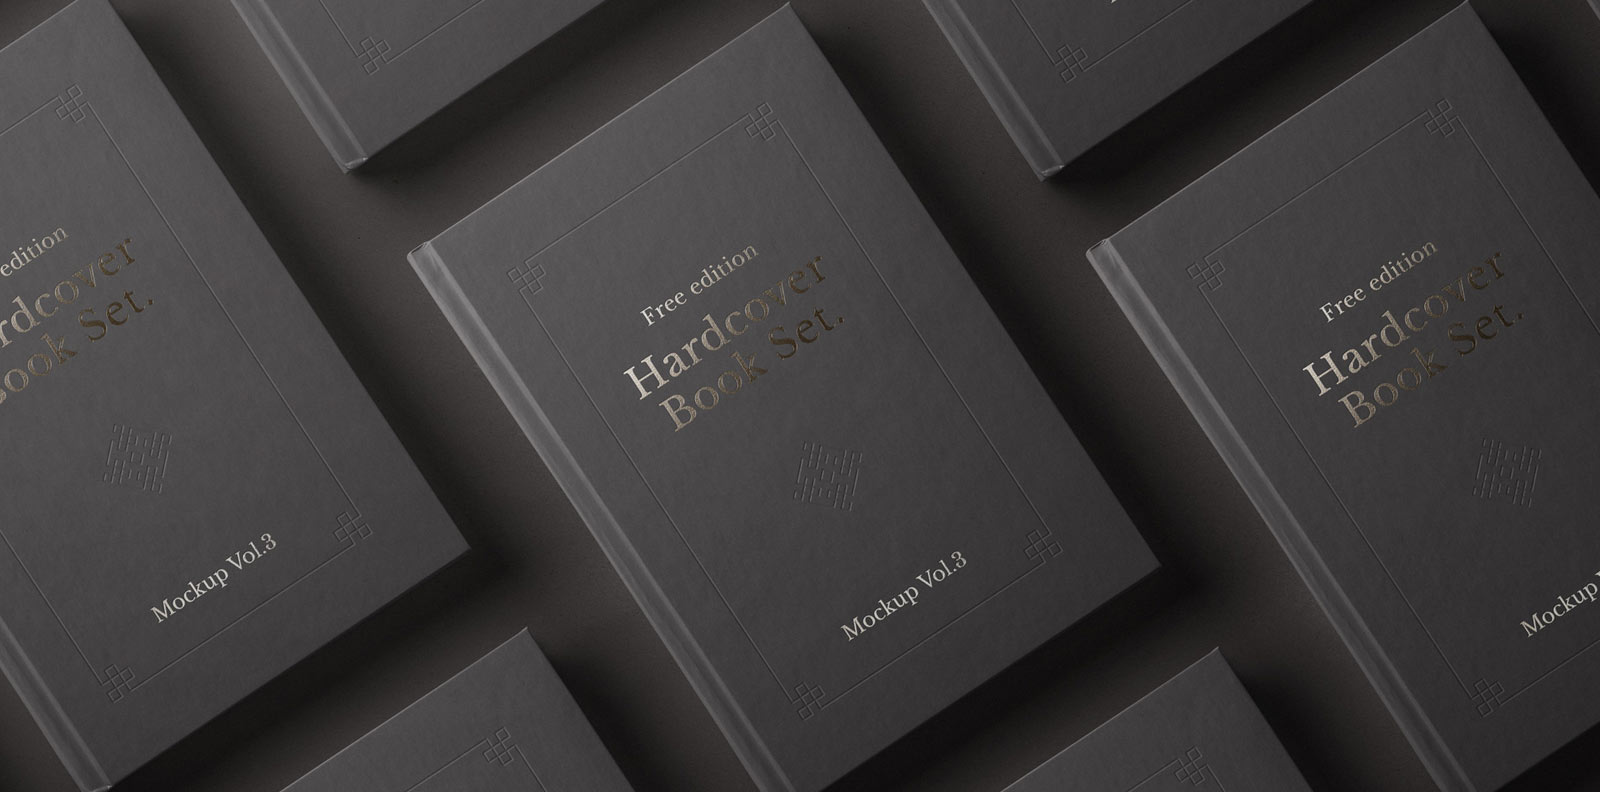 Download 30 Book Mockups Best Of Free Premium Psd Templates Yellowimages Mockups